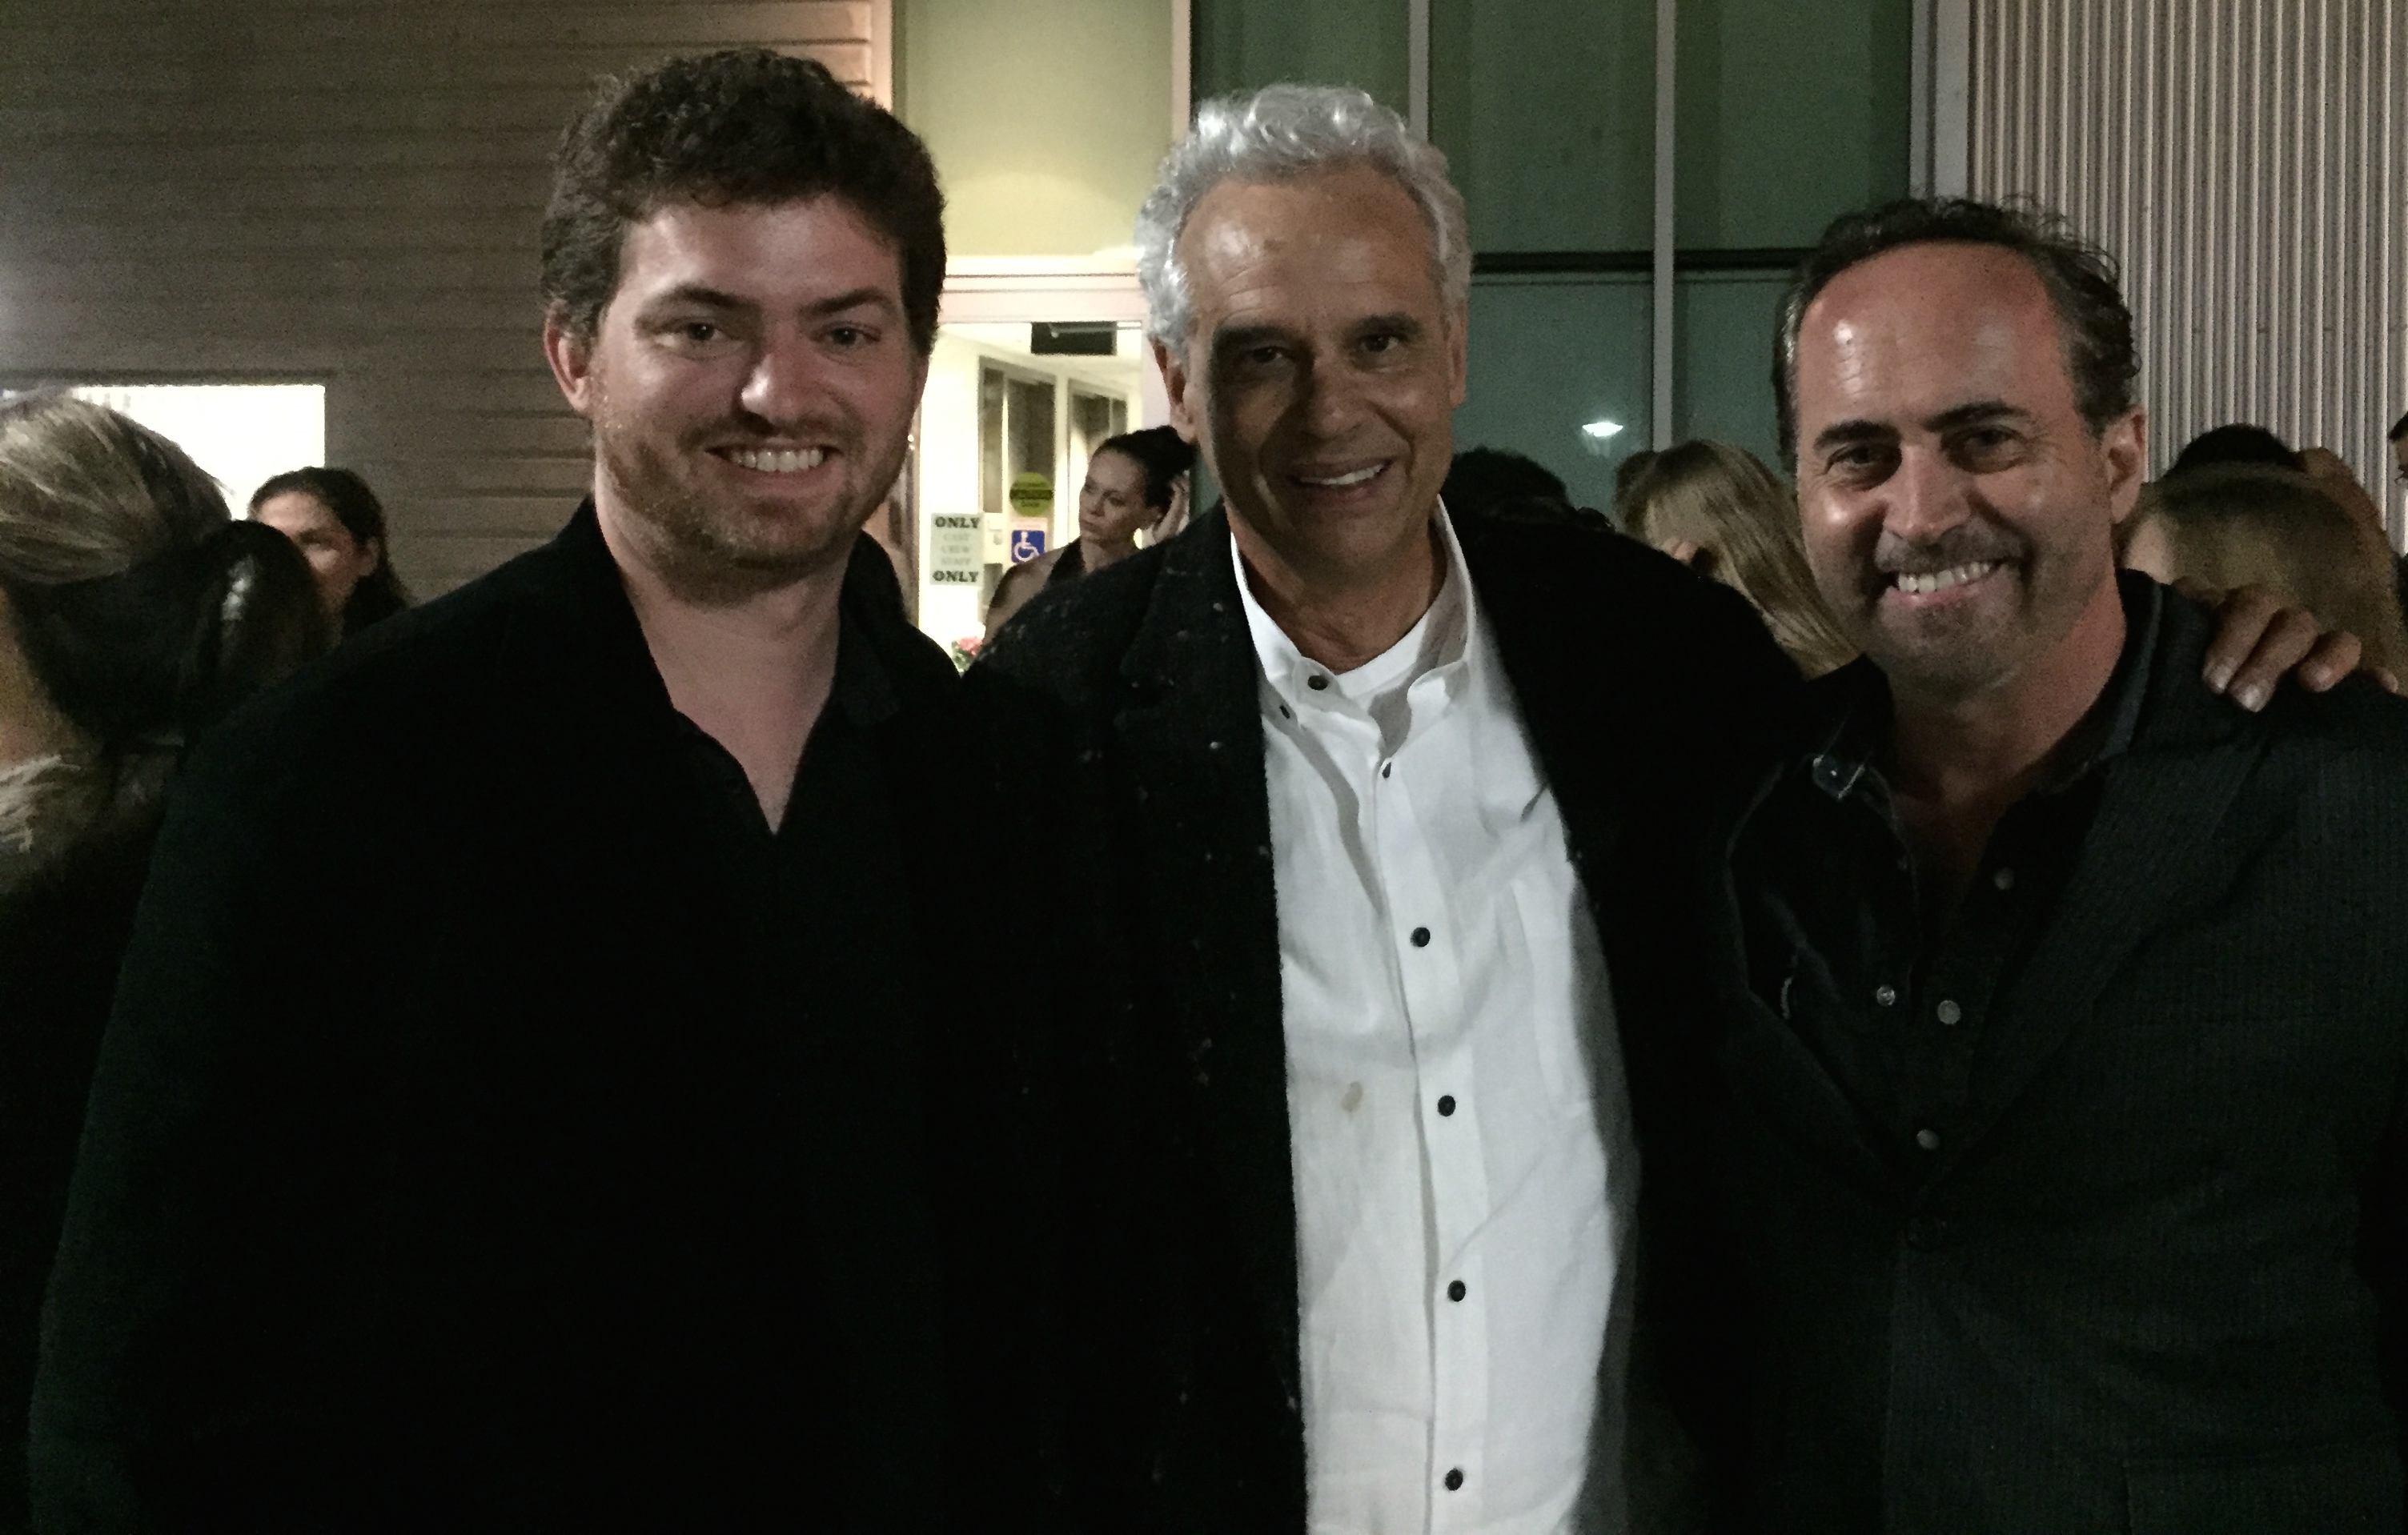 Tyler Westen, Bill Borden and Ralph Guzzo at opening of musical Locals Only - written and created by Bill Borden. ralph and Tyler composed 6 of the songs and lyrics for this original Surf Rock Musical.